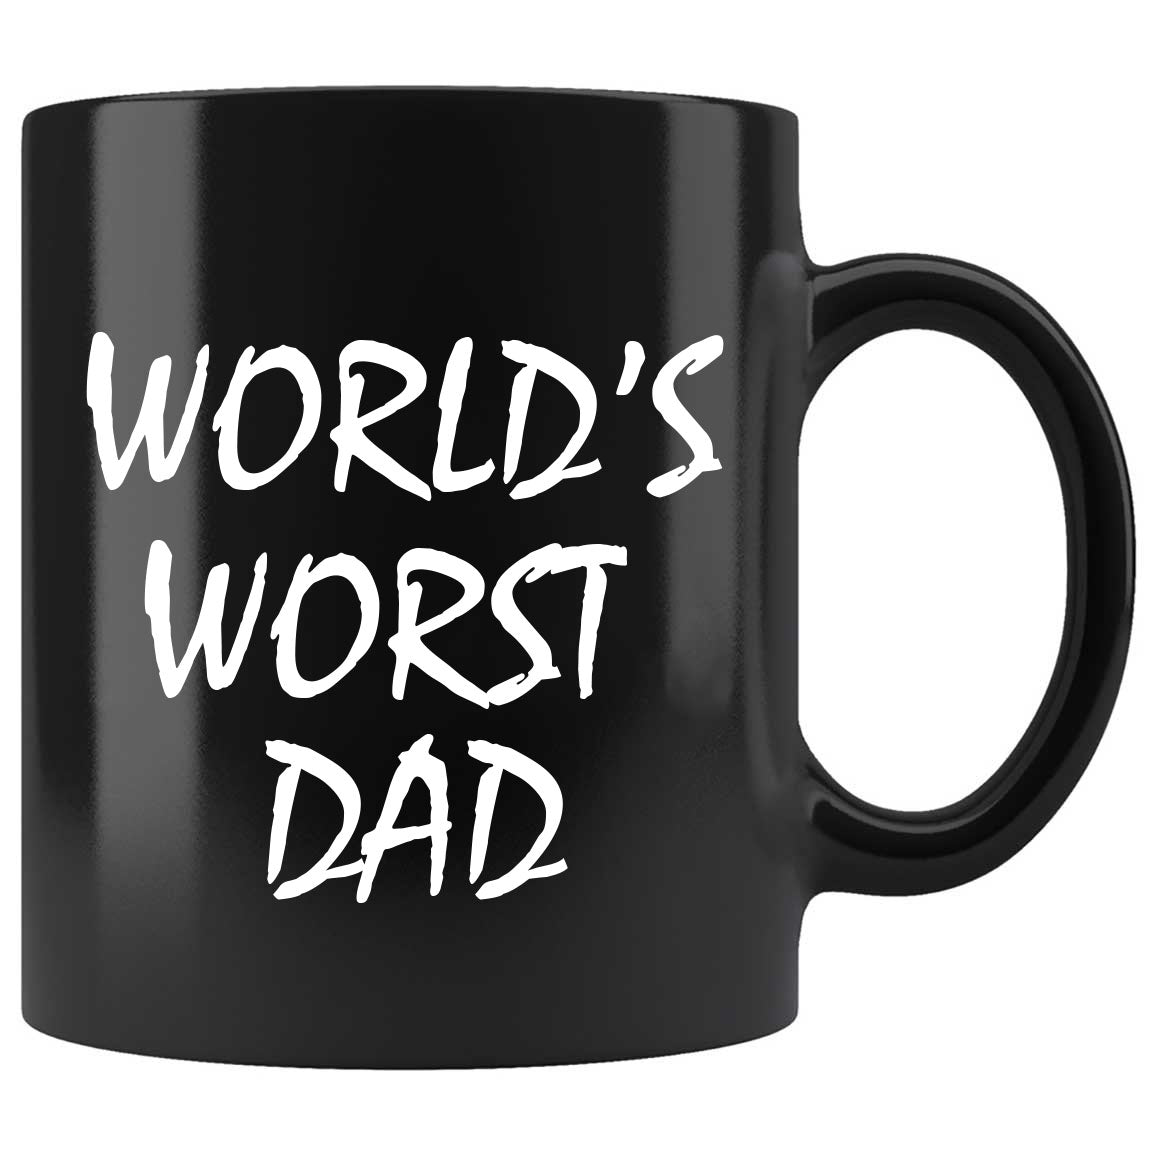 Skitongifts Funny Ceramic Coffee Mug For Birthday, Mother's Day, Father's Day, Christmas PN161221_Worlds Worst Dad